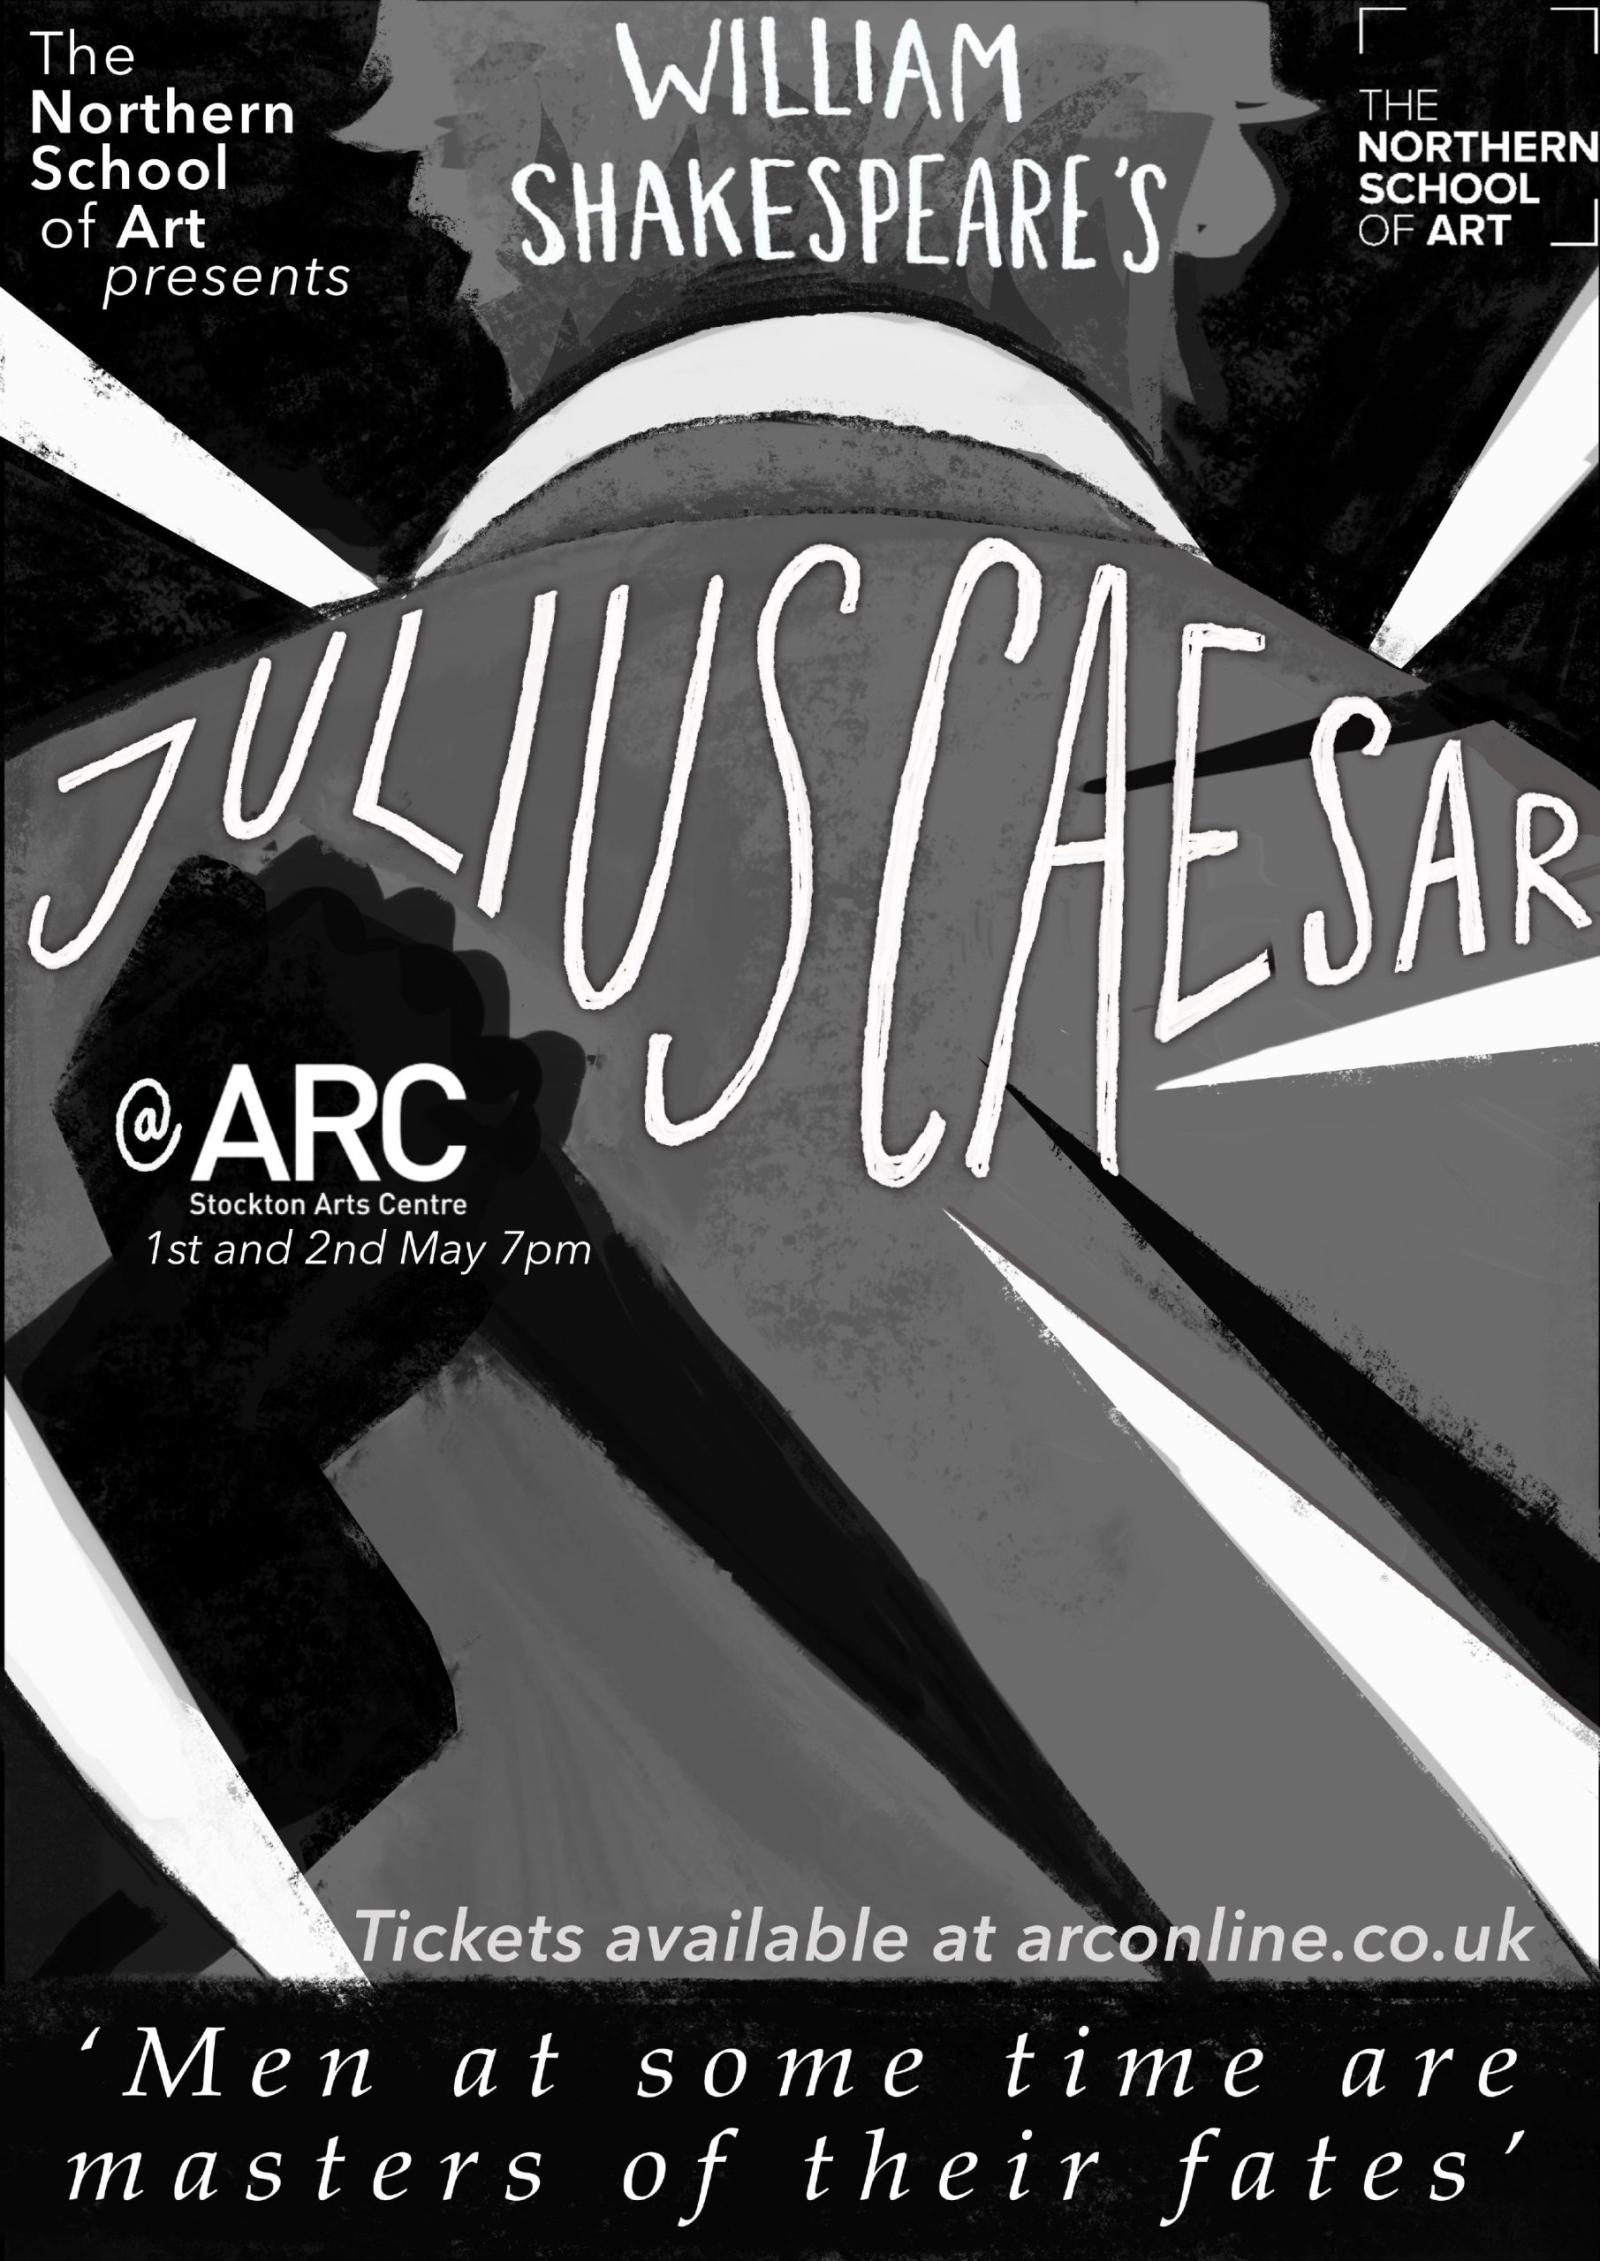 Julius Caesar by William Shakespeare <br>1st & 2nd May 7pm<br>Arc, Stockton Arts Centre 